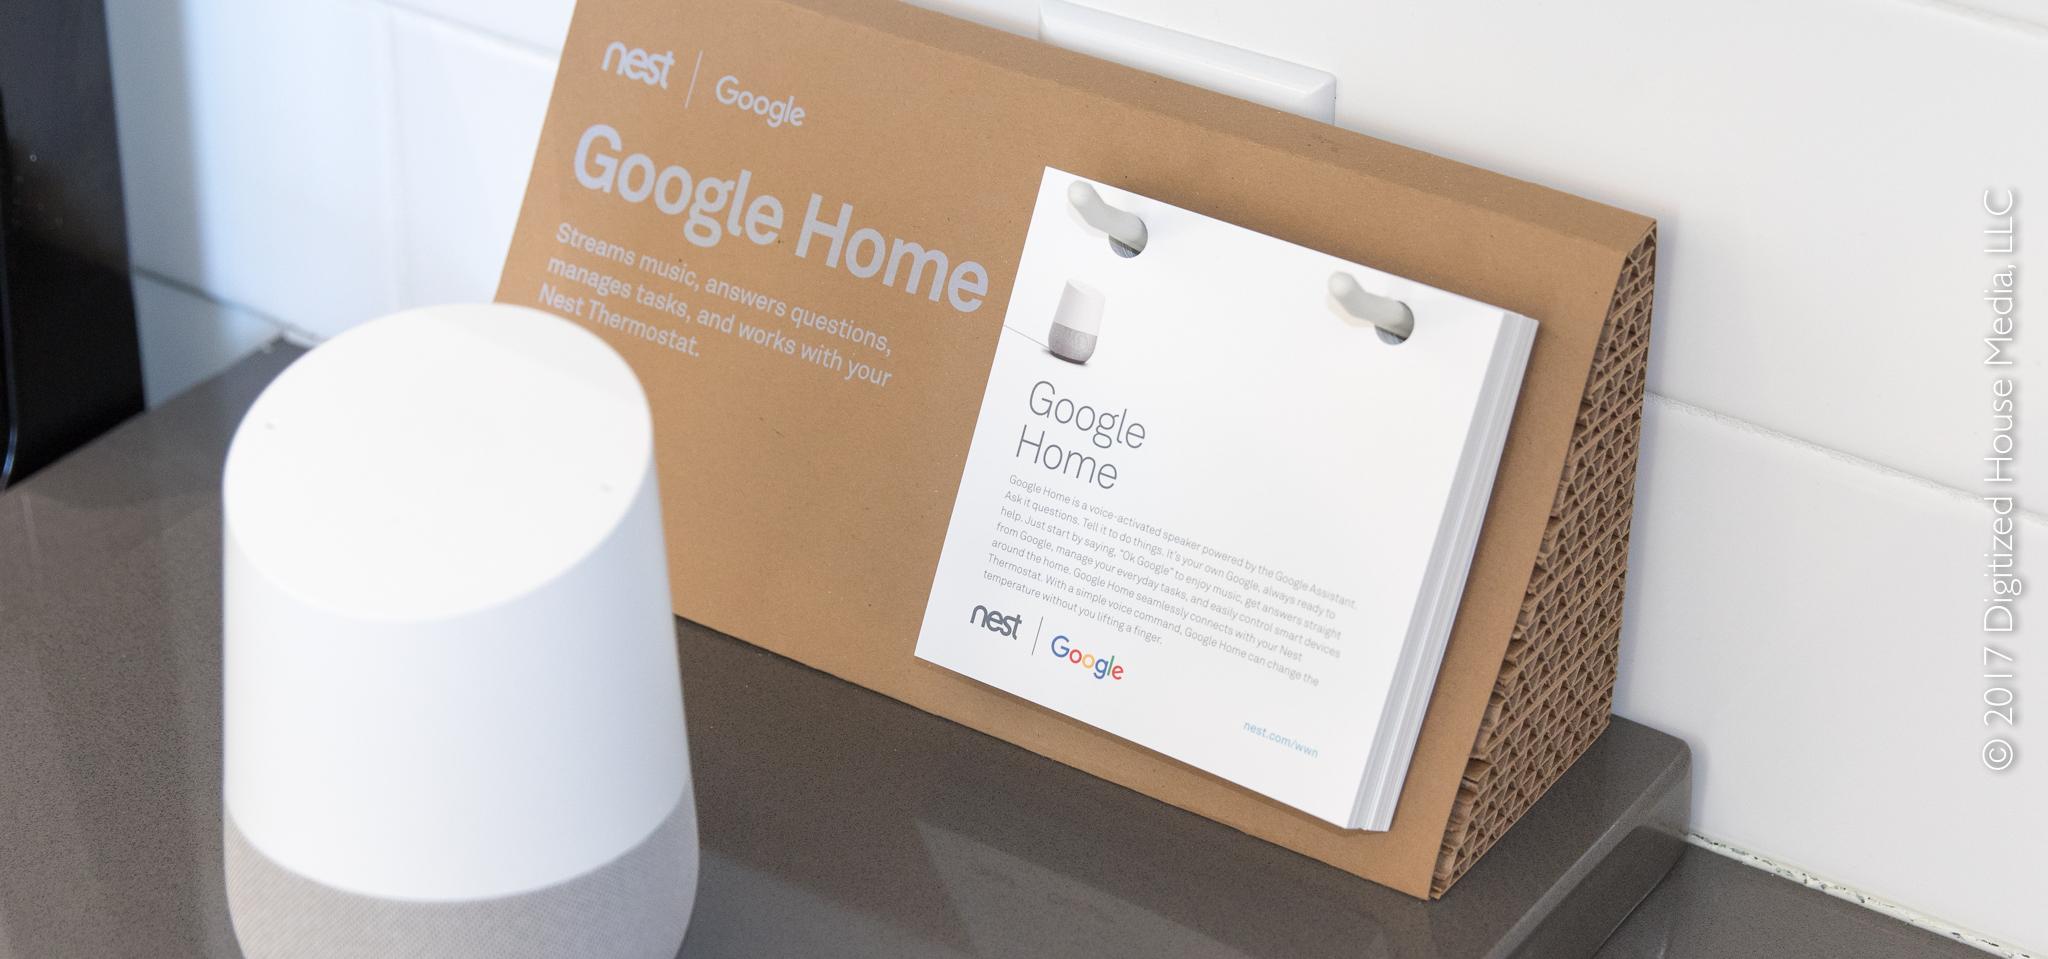 Nest Connected Home: Google Home